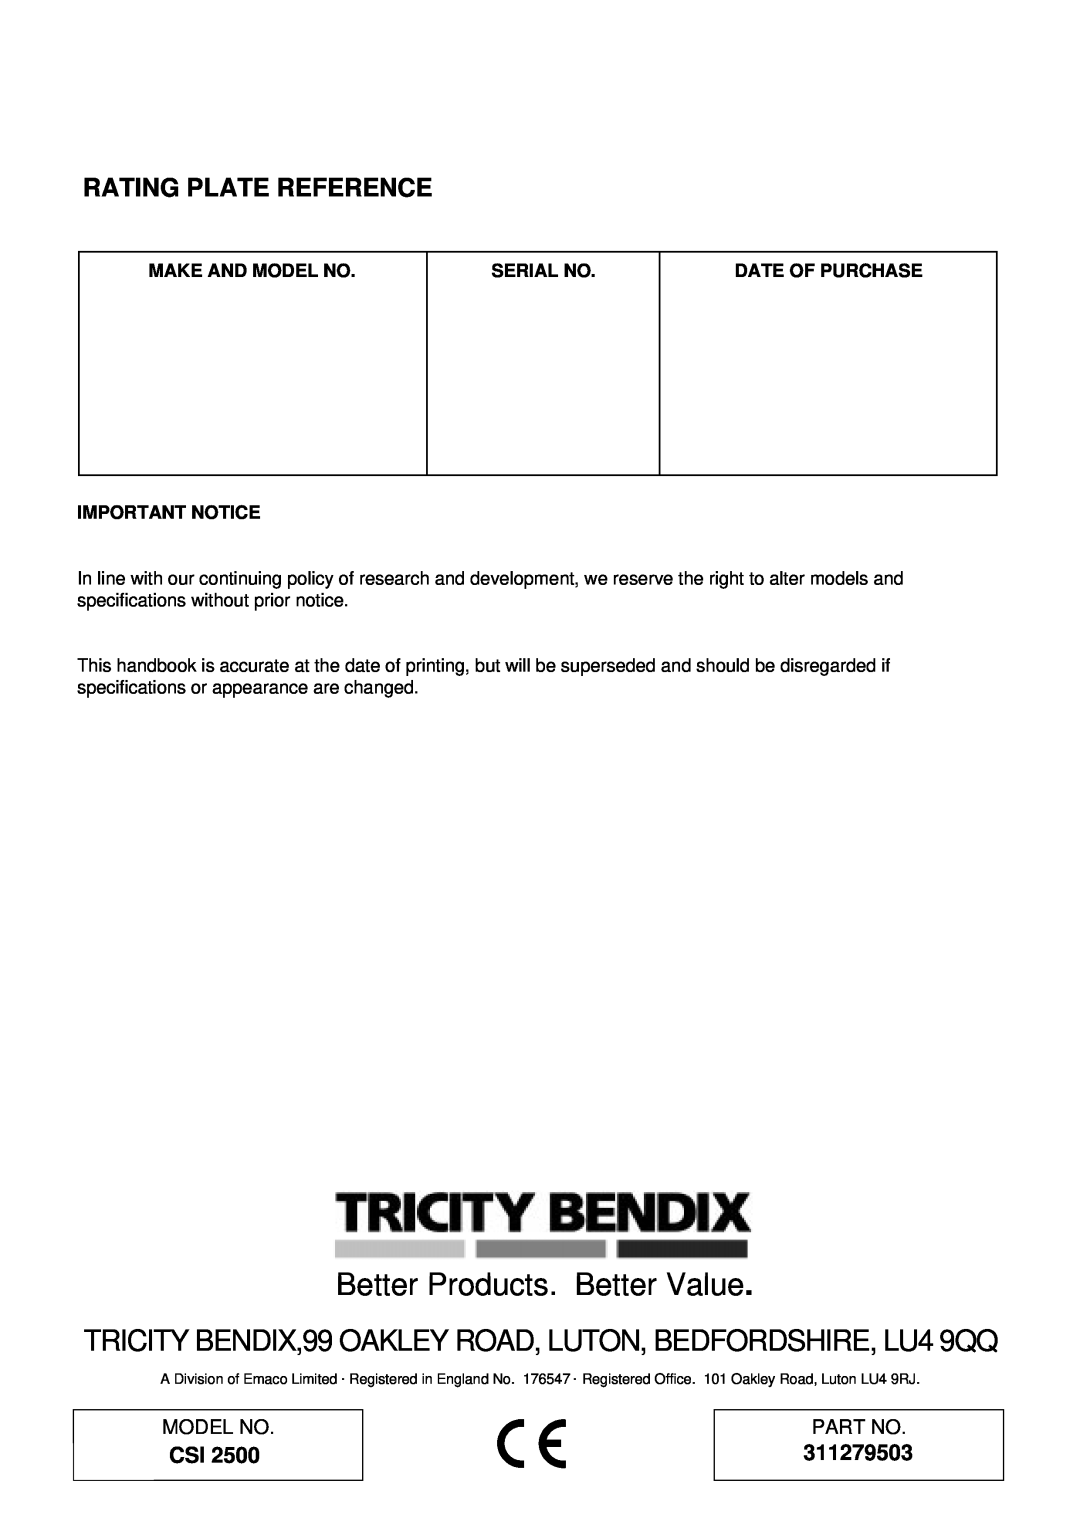 Tricity Bendix CSI 2500 Rating Plate Reference, 311279503, Better Products. Better Value, Make And Model No, Serial No 